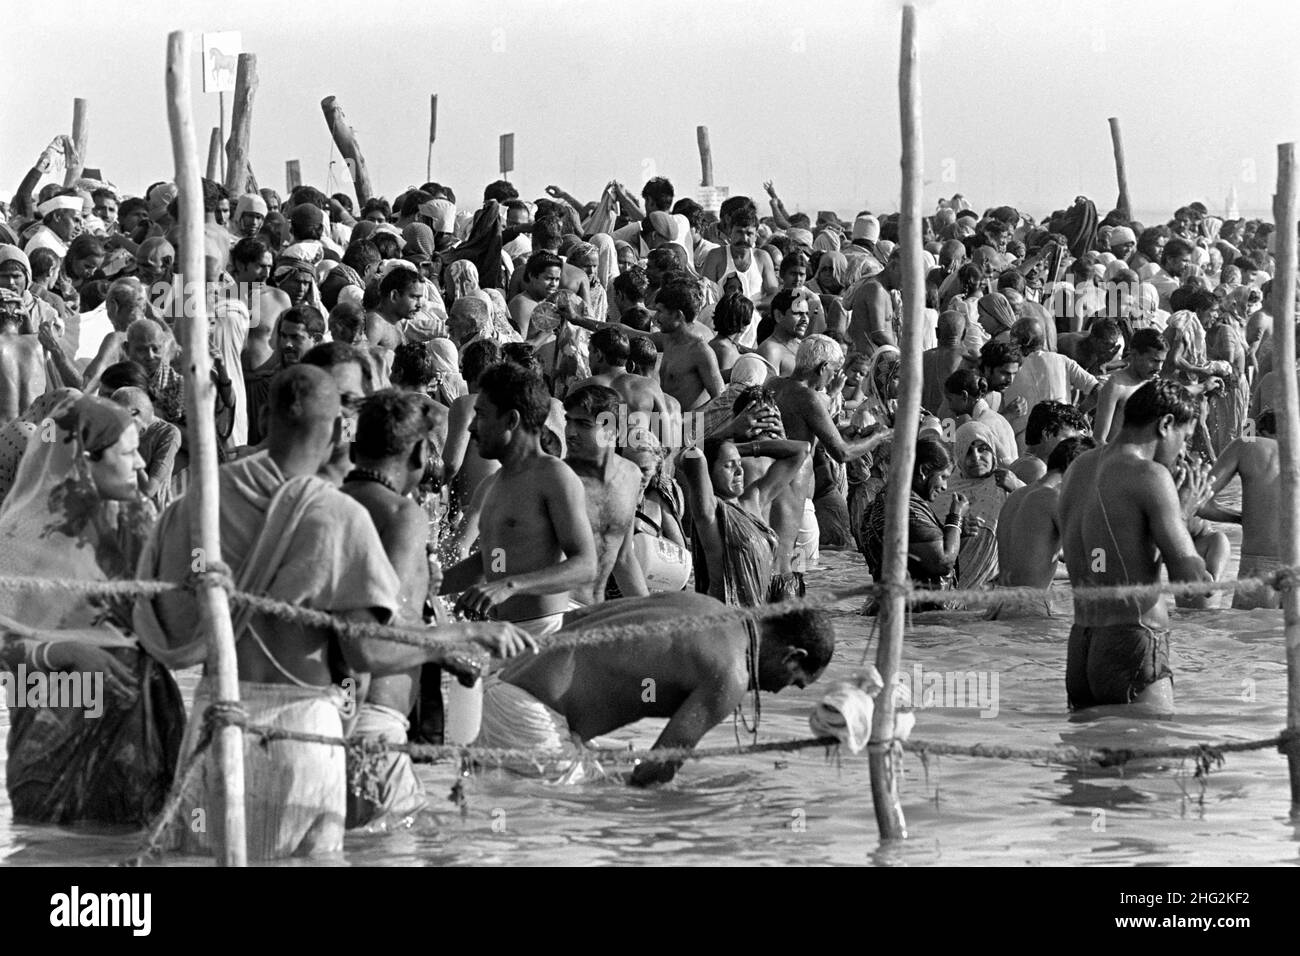 Indian pilgrims perform ritual bathing in the confluence of the Ganges and Yamuna Rivers at the climax of the Kumbh Mela festival February 6, 1989 in Allahabad, India. The six-week festival is held every 12th year and attracts millions of Hindu pilgrims. Stock Photo